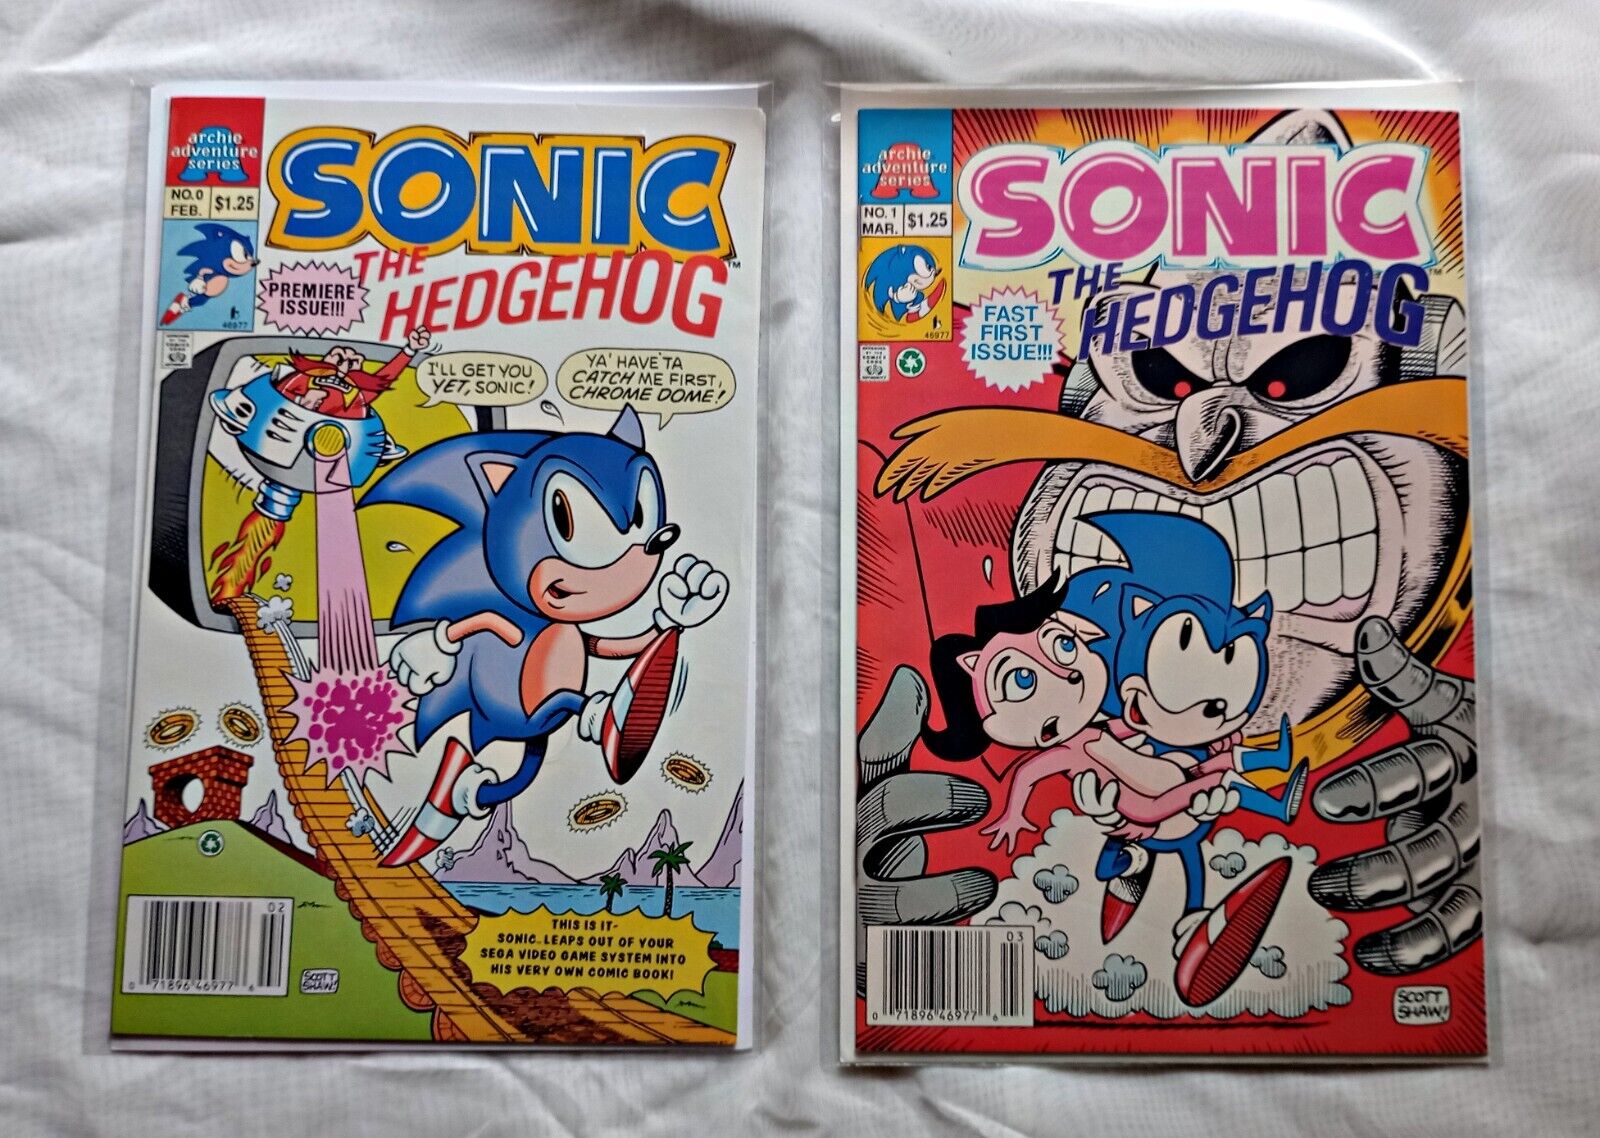 Sonic The Hedgehog #0-1, Archie Comics 1992 NM Newsstand